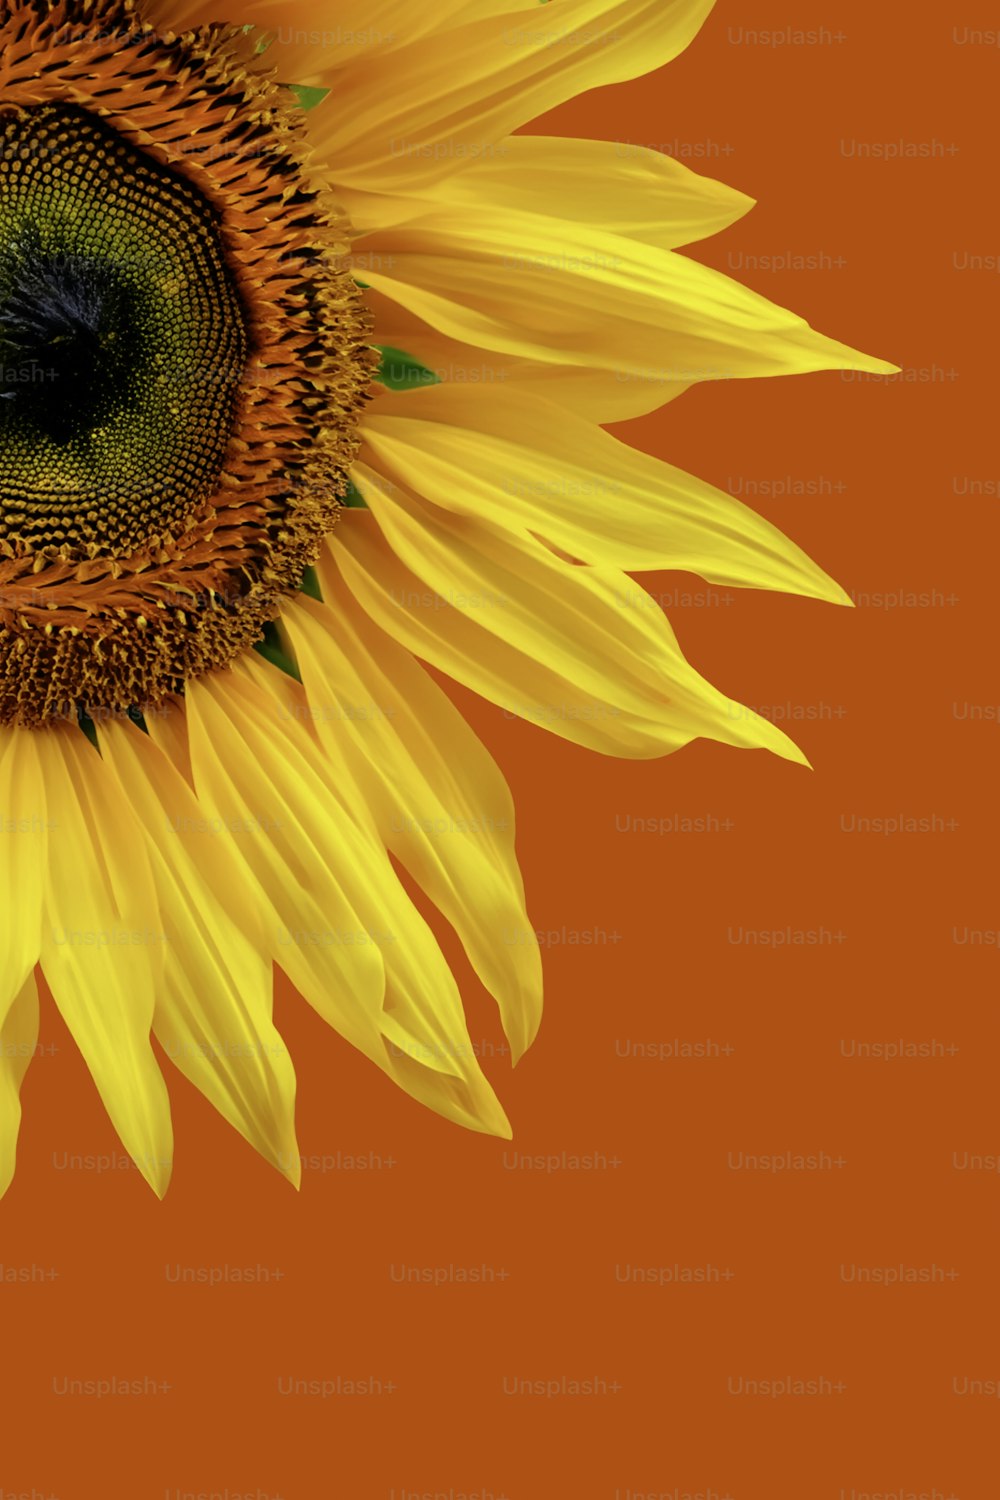 a yellow sunflower with a green center on an orange background